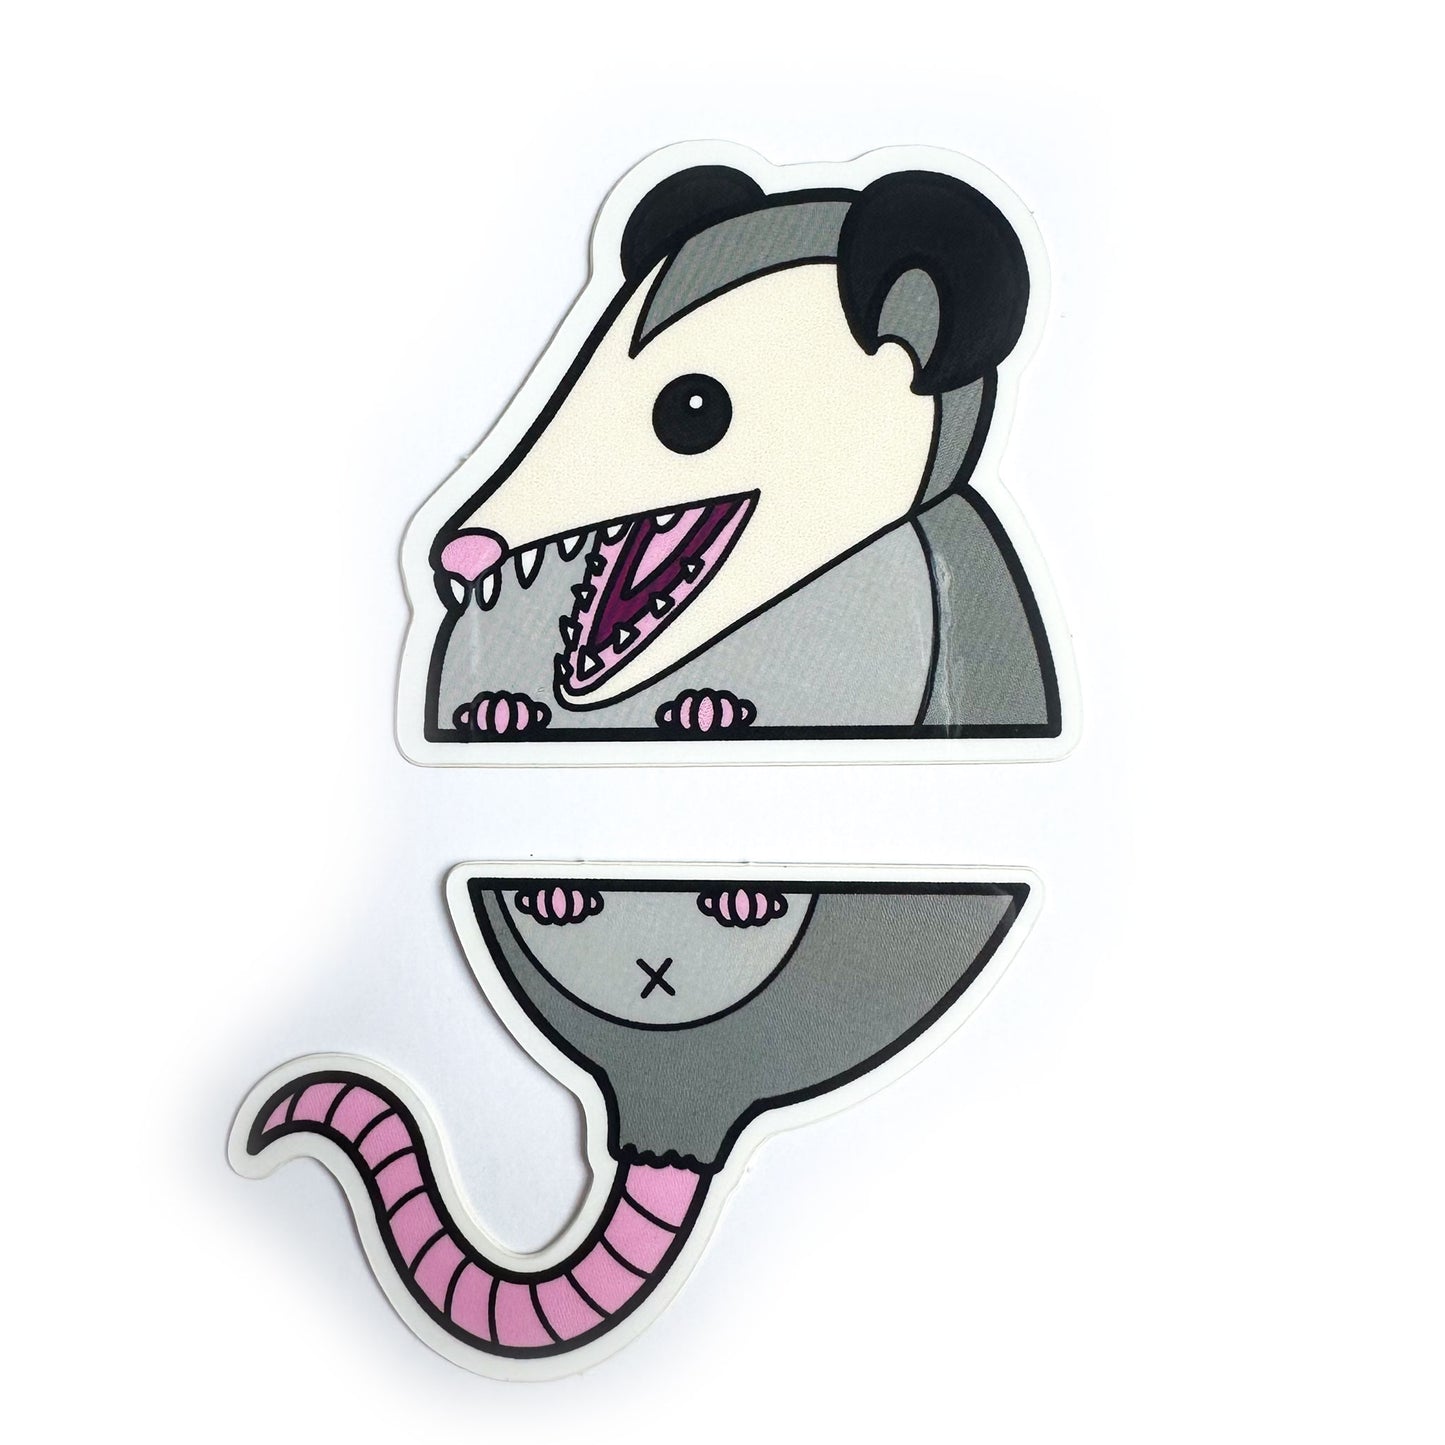 Two stickers that come together to form the top and bottom half of an opossum. The opossum is illustrated in a cartoony style with black lines and block colors. 